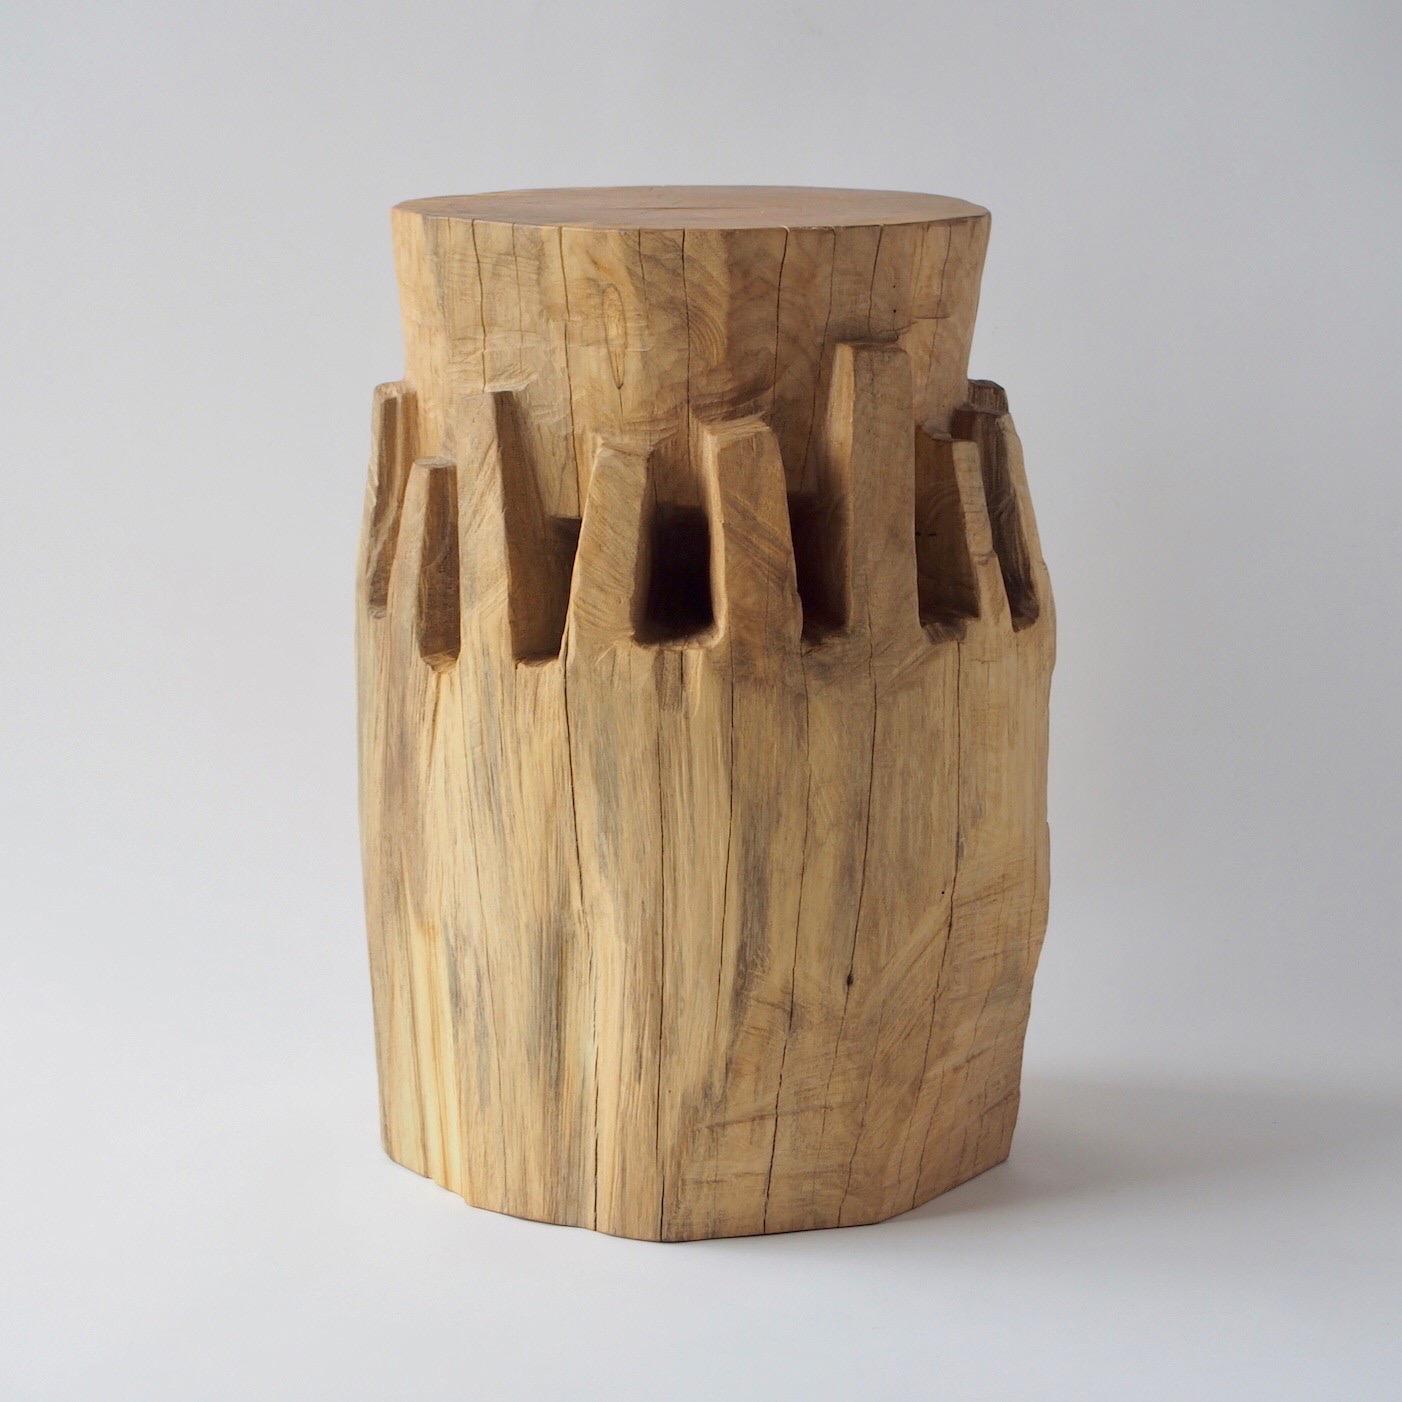 Hand-Carved Hiroyuki Nishimura Zougei Sculptural Side Table Stool 28 Tribal Glamping For Sale